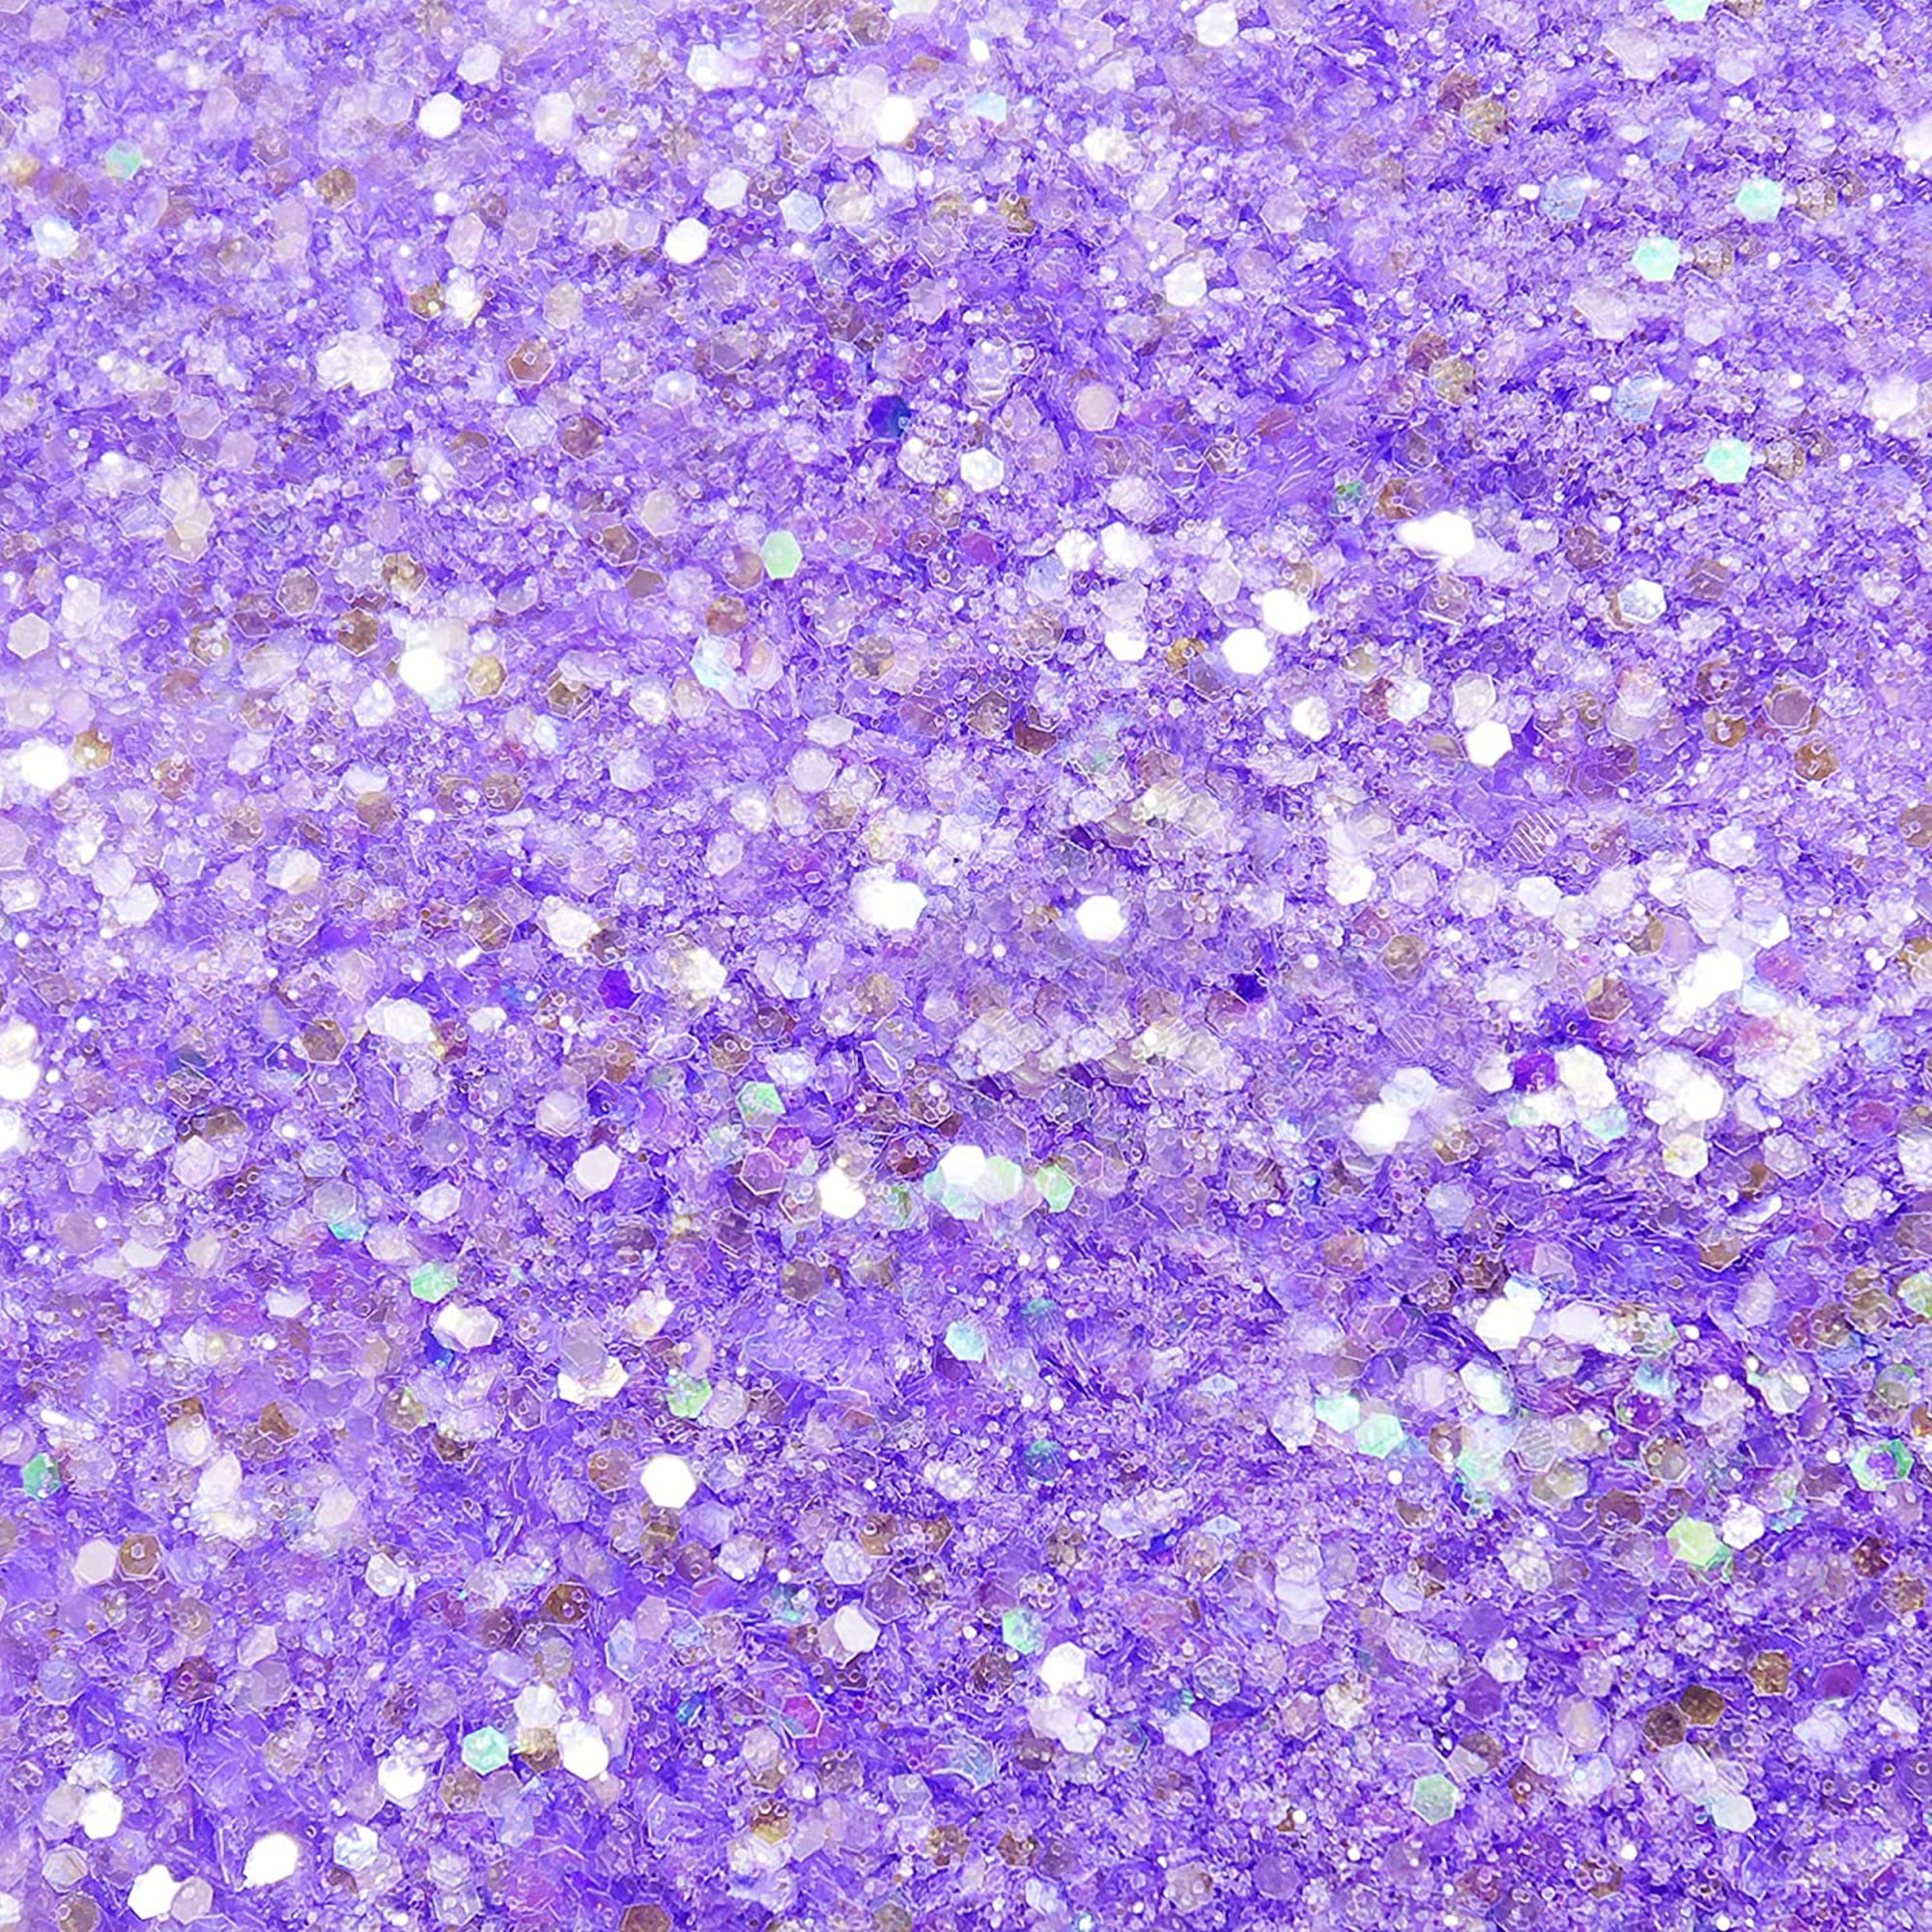 Sweetzo Light Purple Edible Glitter Cake Decorations, Lilac Shimmery Sparkle Flakes for Cakes, Drinks, Cocktails Cupcakes, Cookies and Desserts, 4